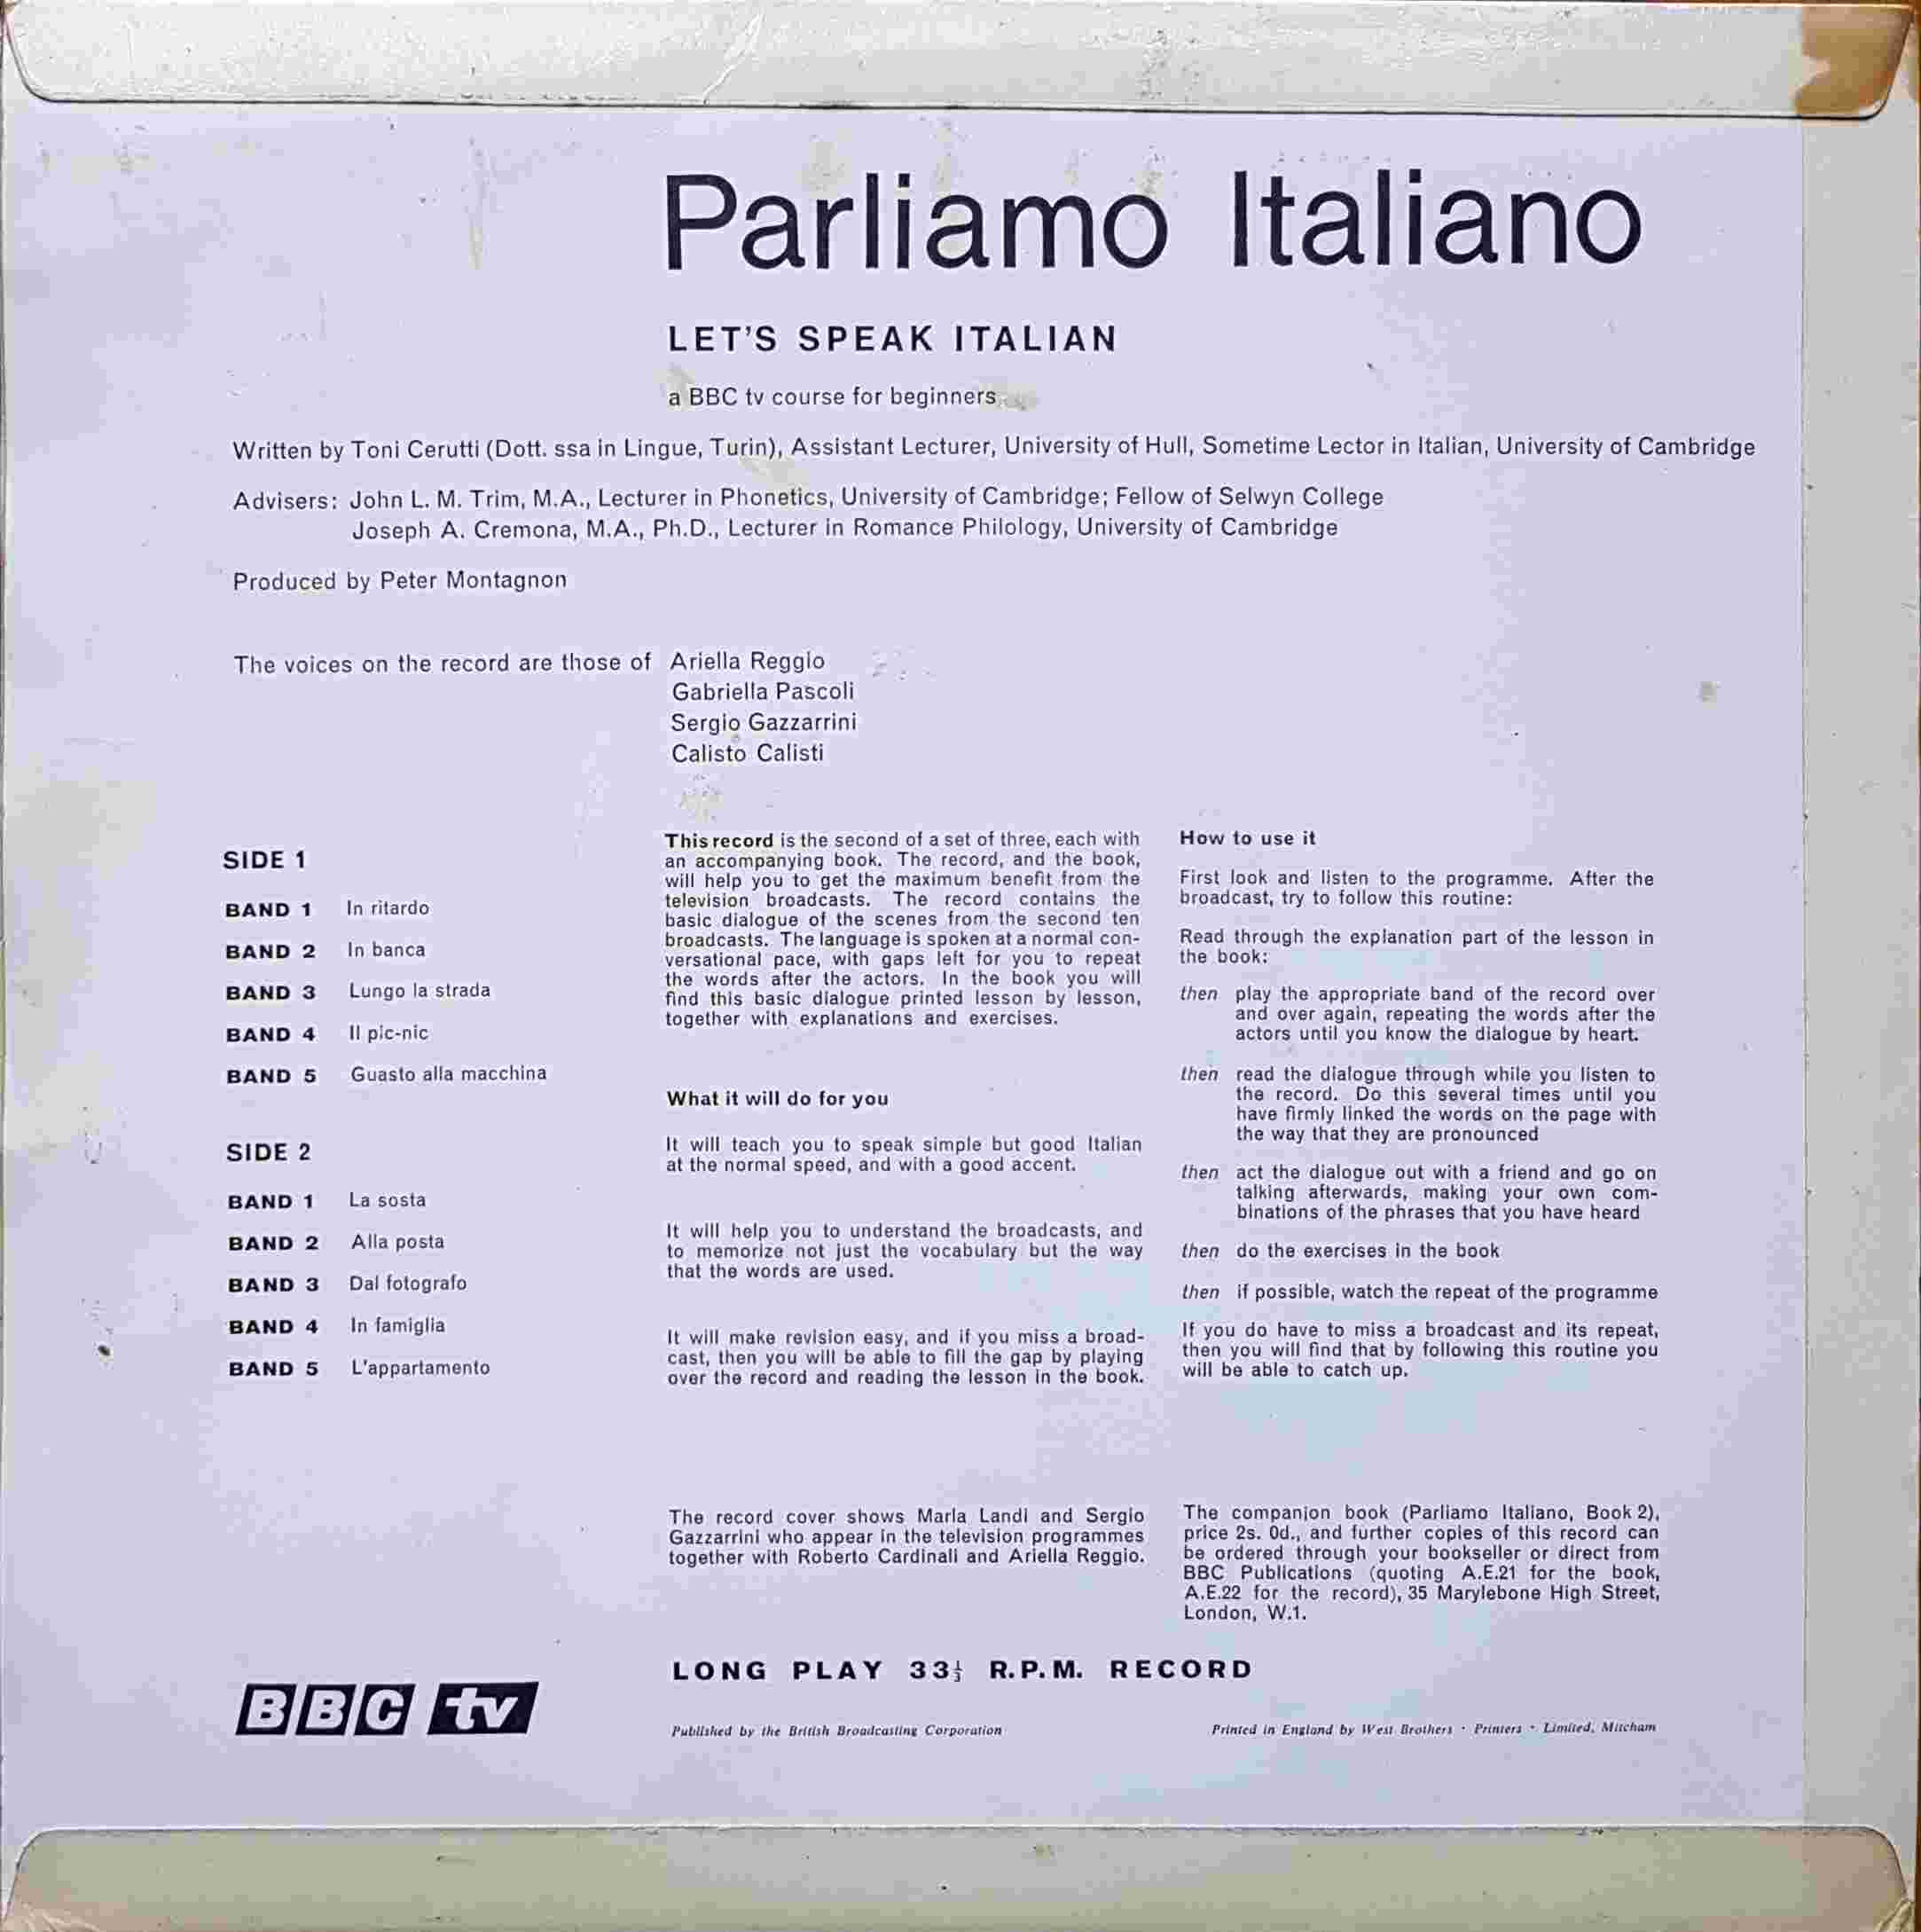 Picture of OP 3/4 Parliamo Italiano - Let's Speak Italian lessons 11 - 20 by artist Toni Cerutti from the BBC records and Tapes library